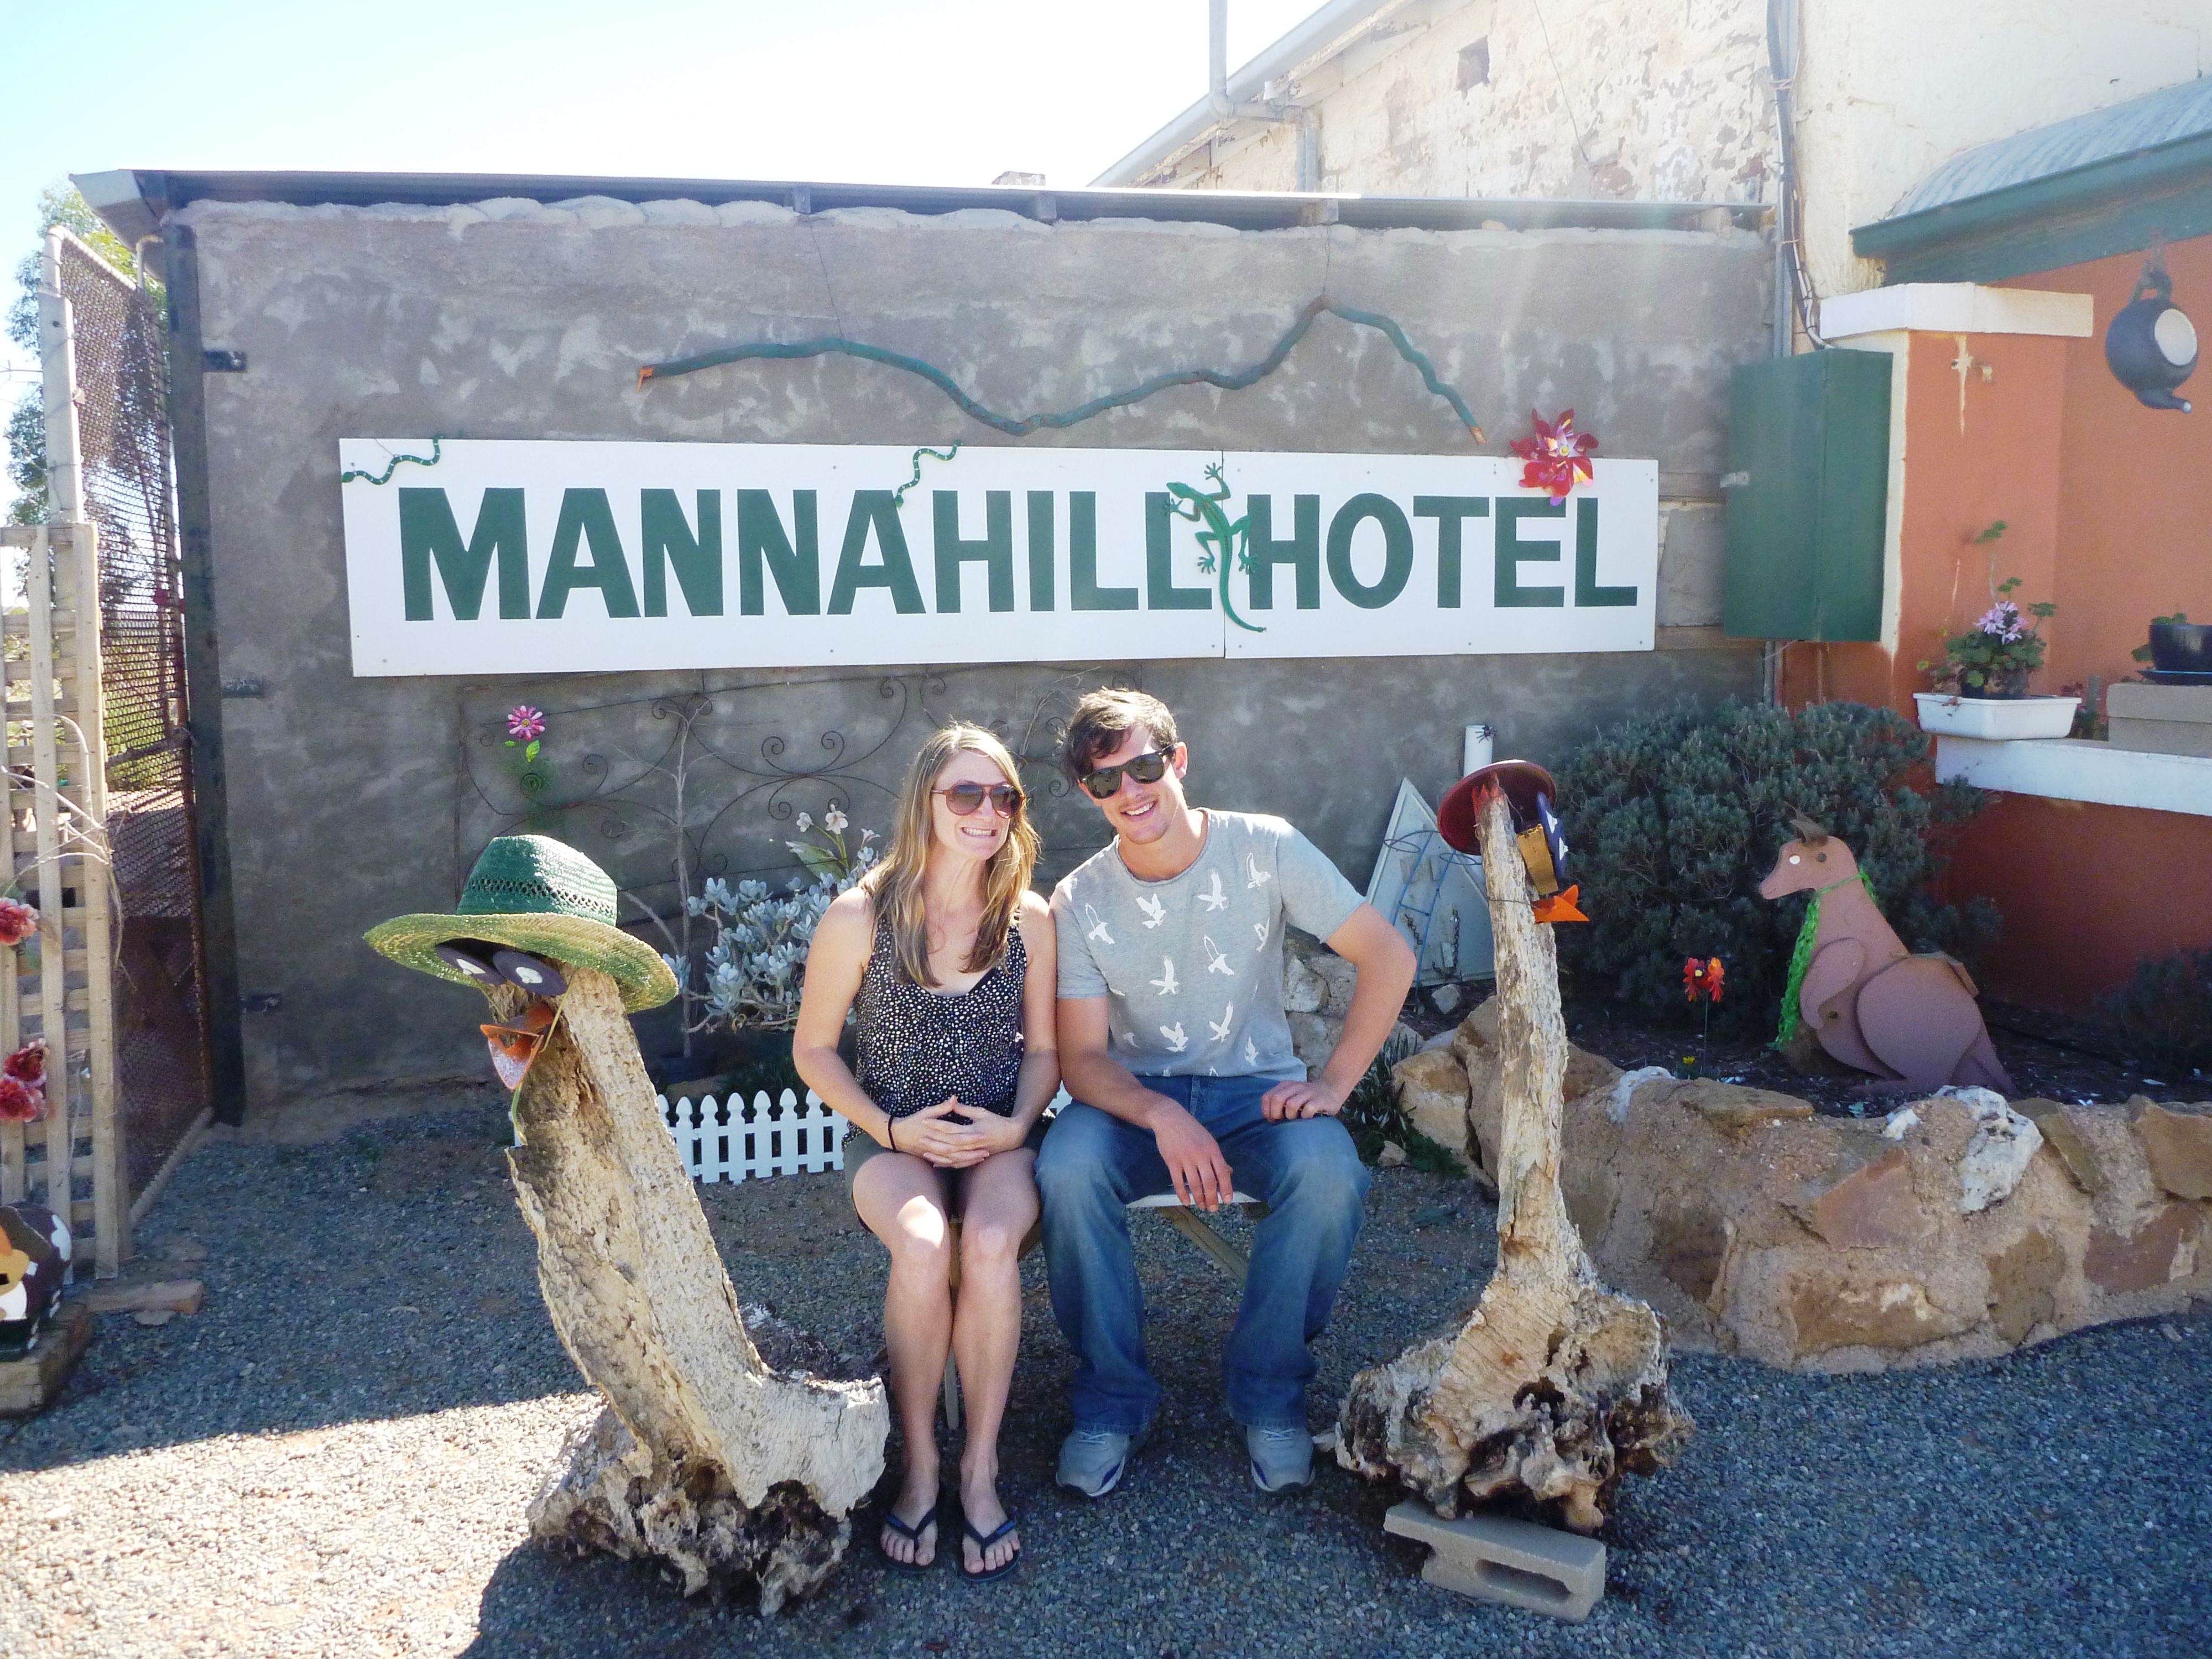 Michelle outside Manna Hotel - Road Trip Tales